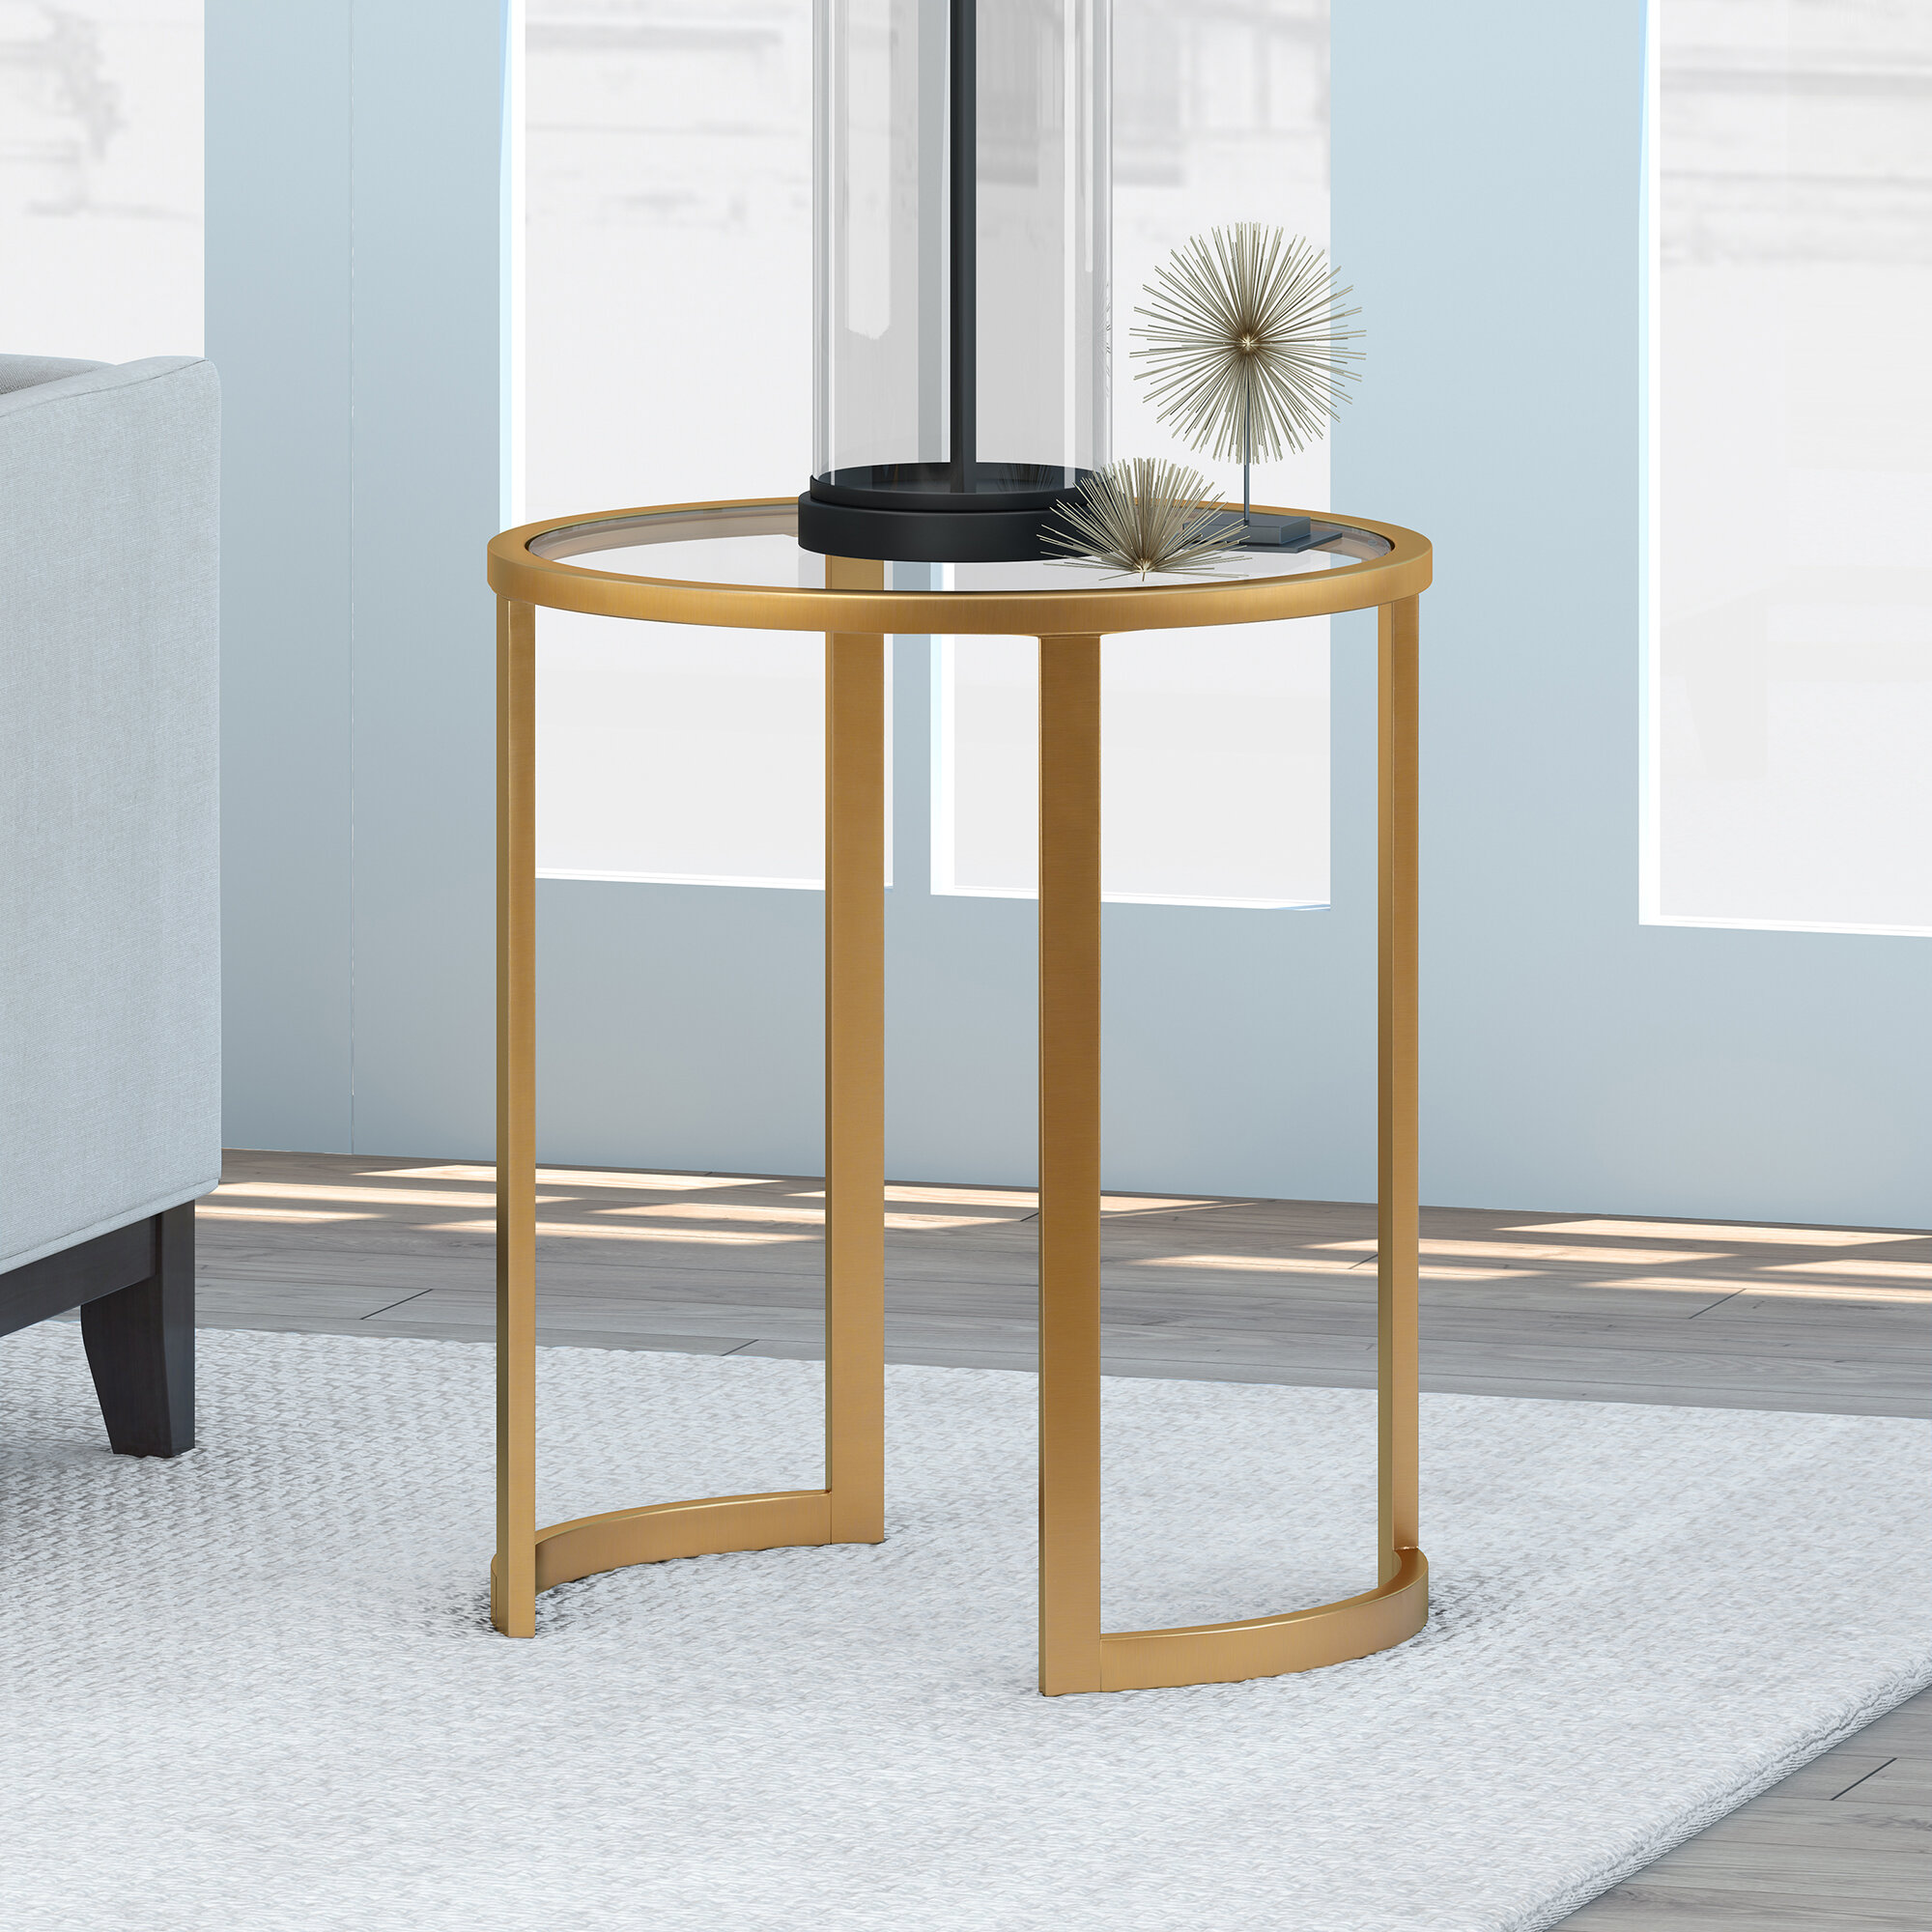 Marble/Gold Gold and Marble Metal Side Table Rutledge & King Britton End Table Round Accent Table Round End Table Gold End Table with Marble Top